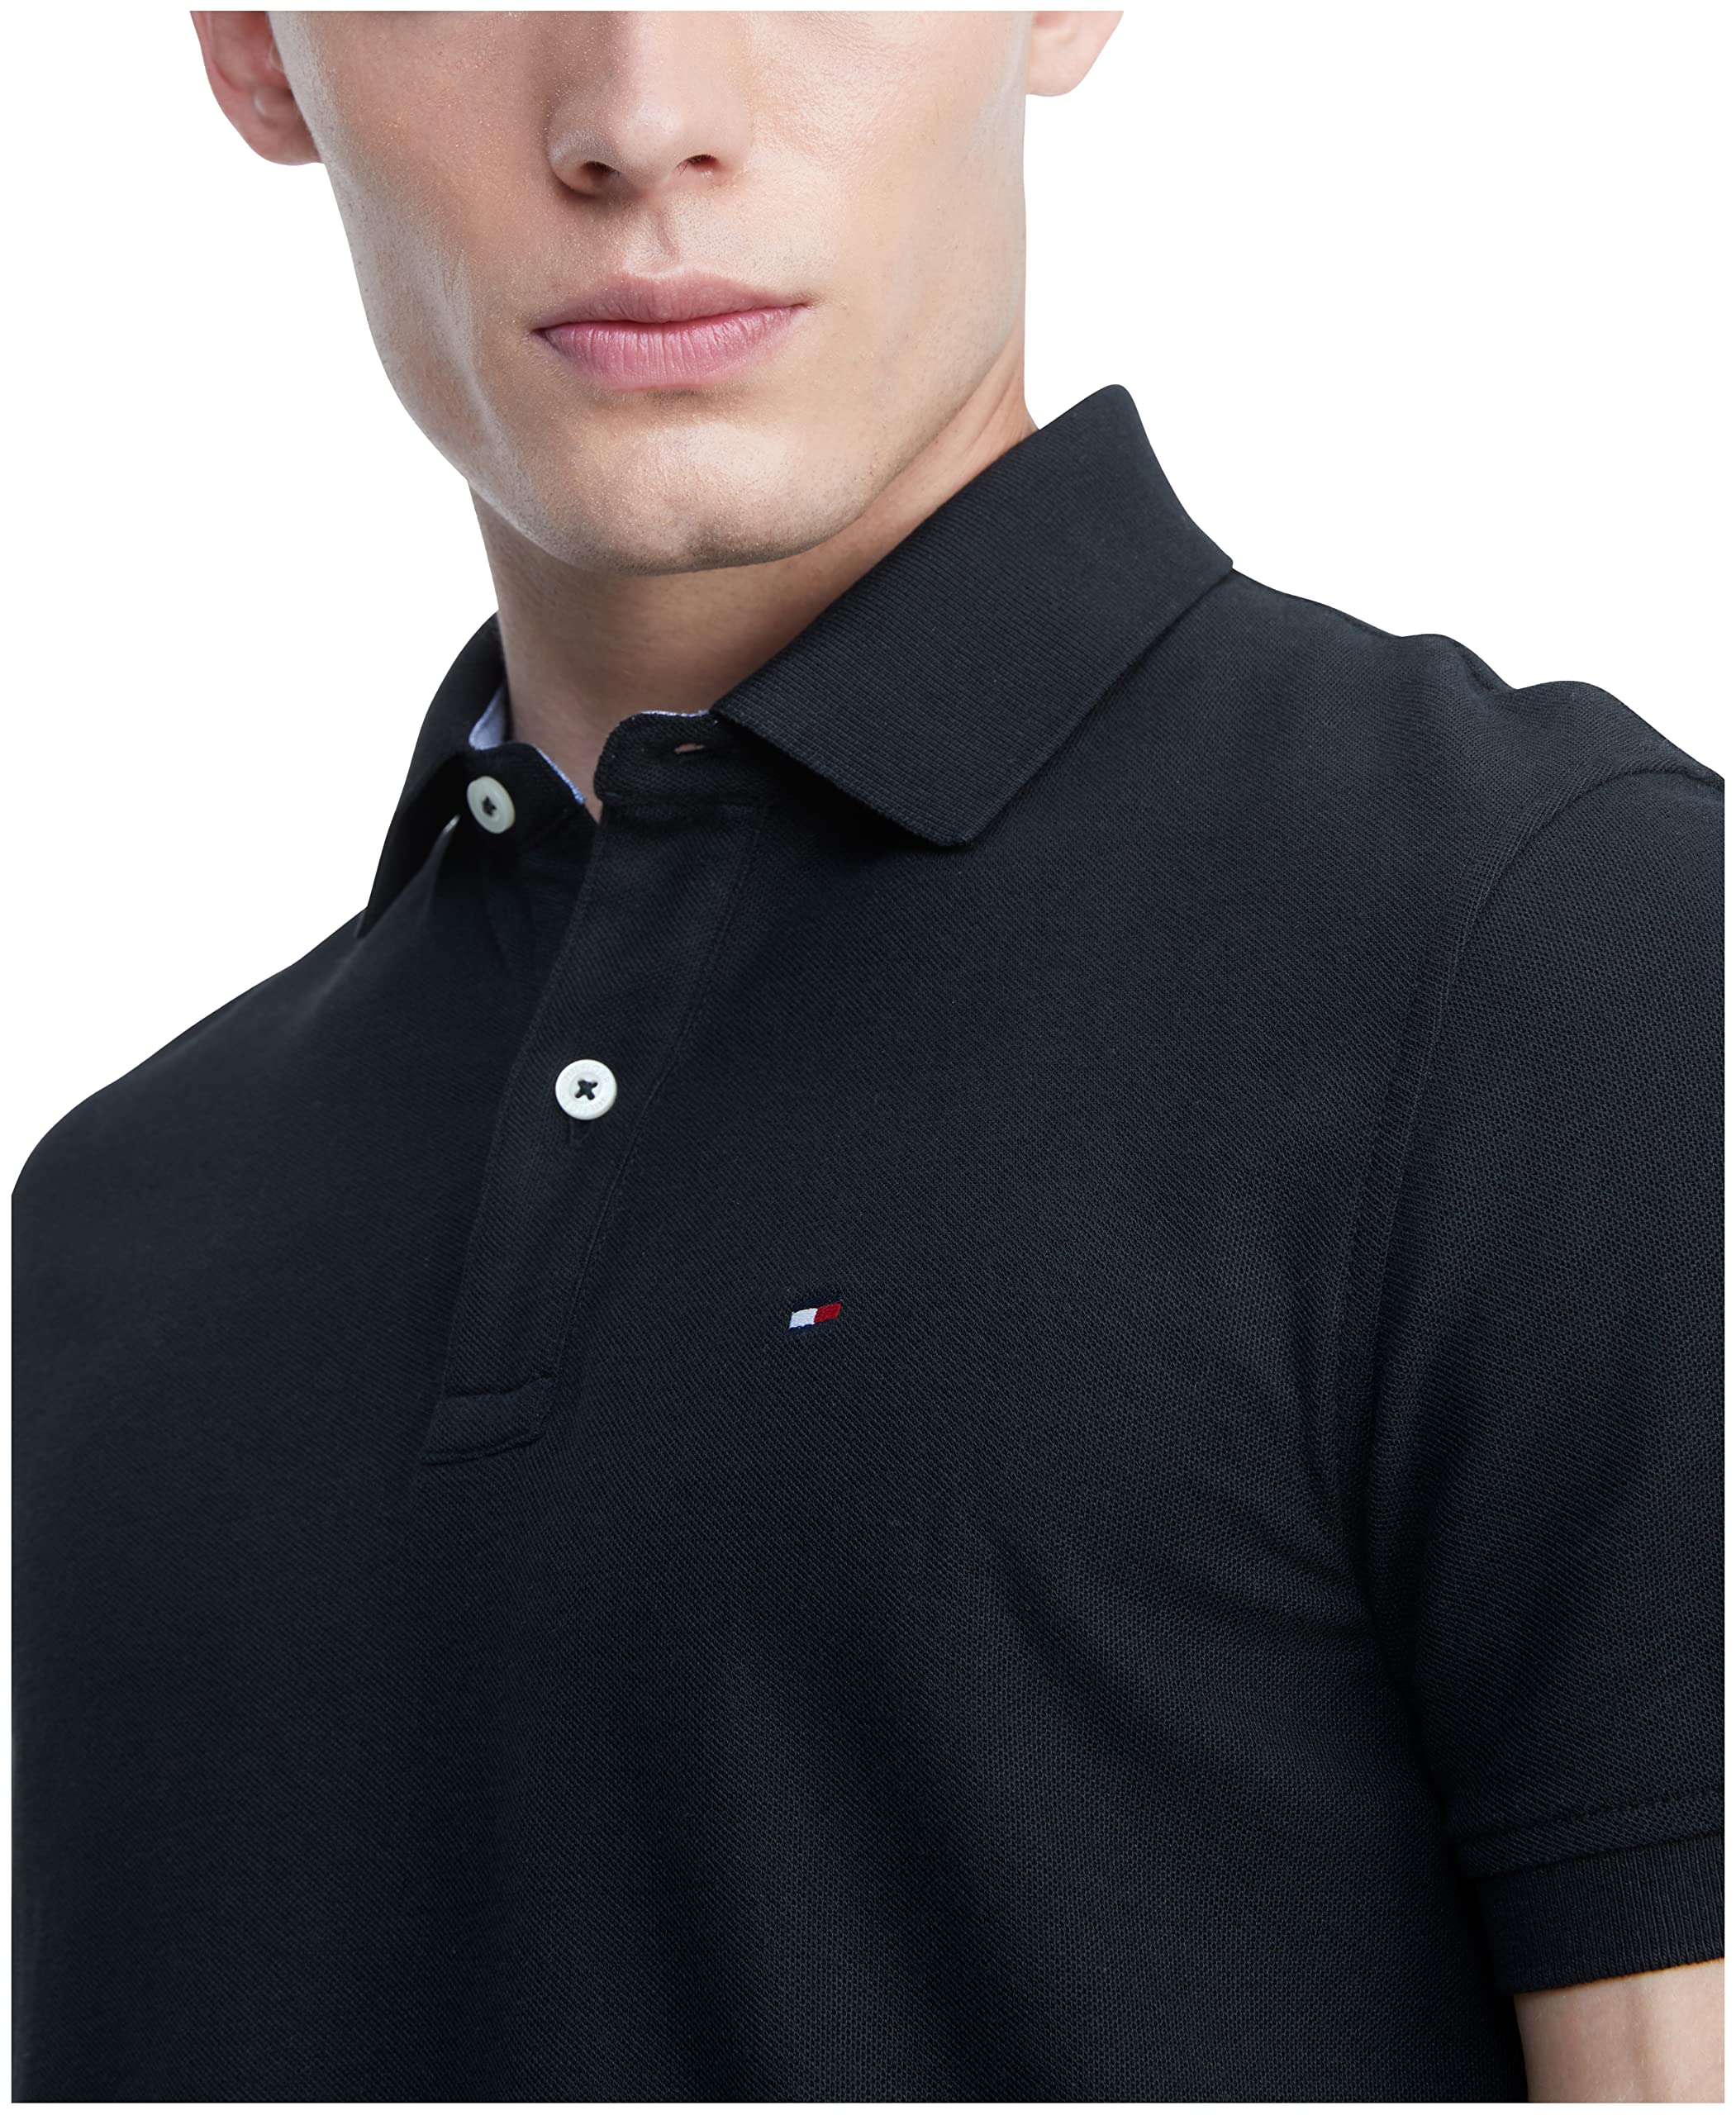 Tommy Hilfiger Men's Short Sleeve Moisture Wicking Stretch Polo Shirt with Quick Dry + UV Protection 